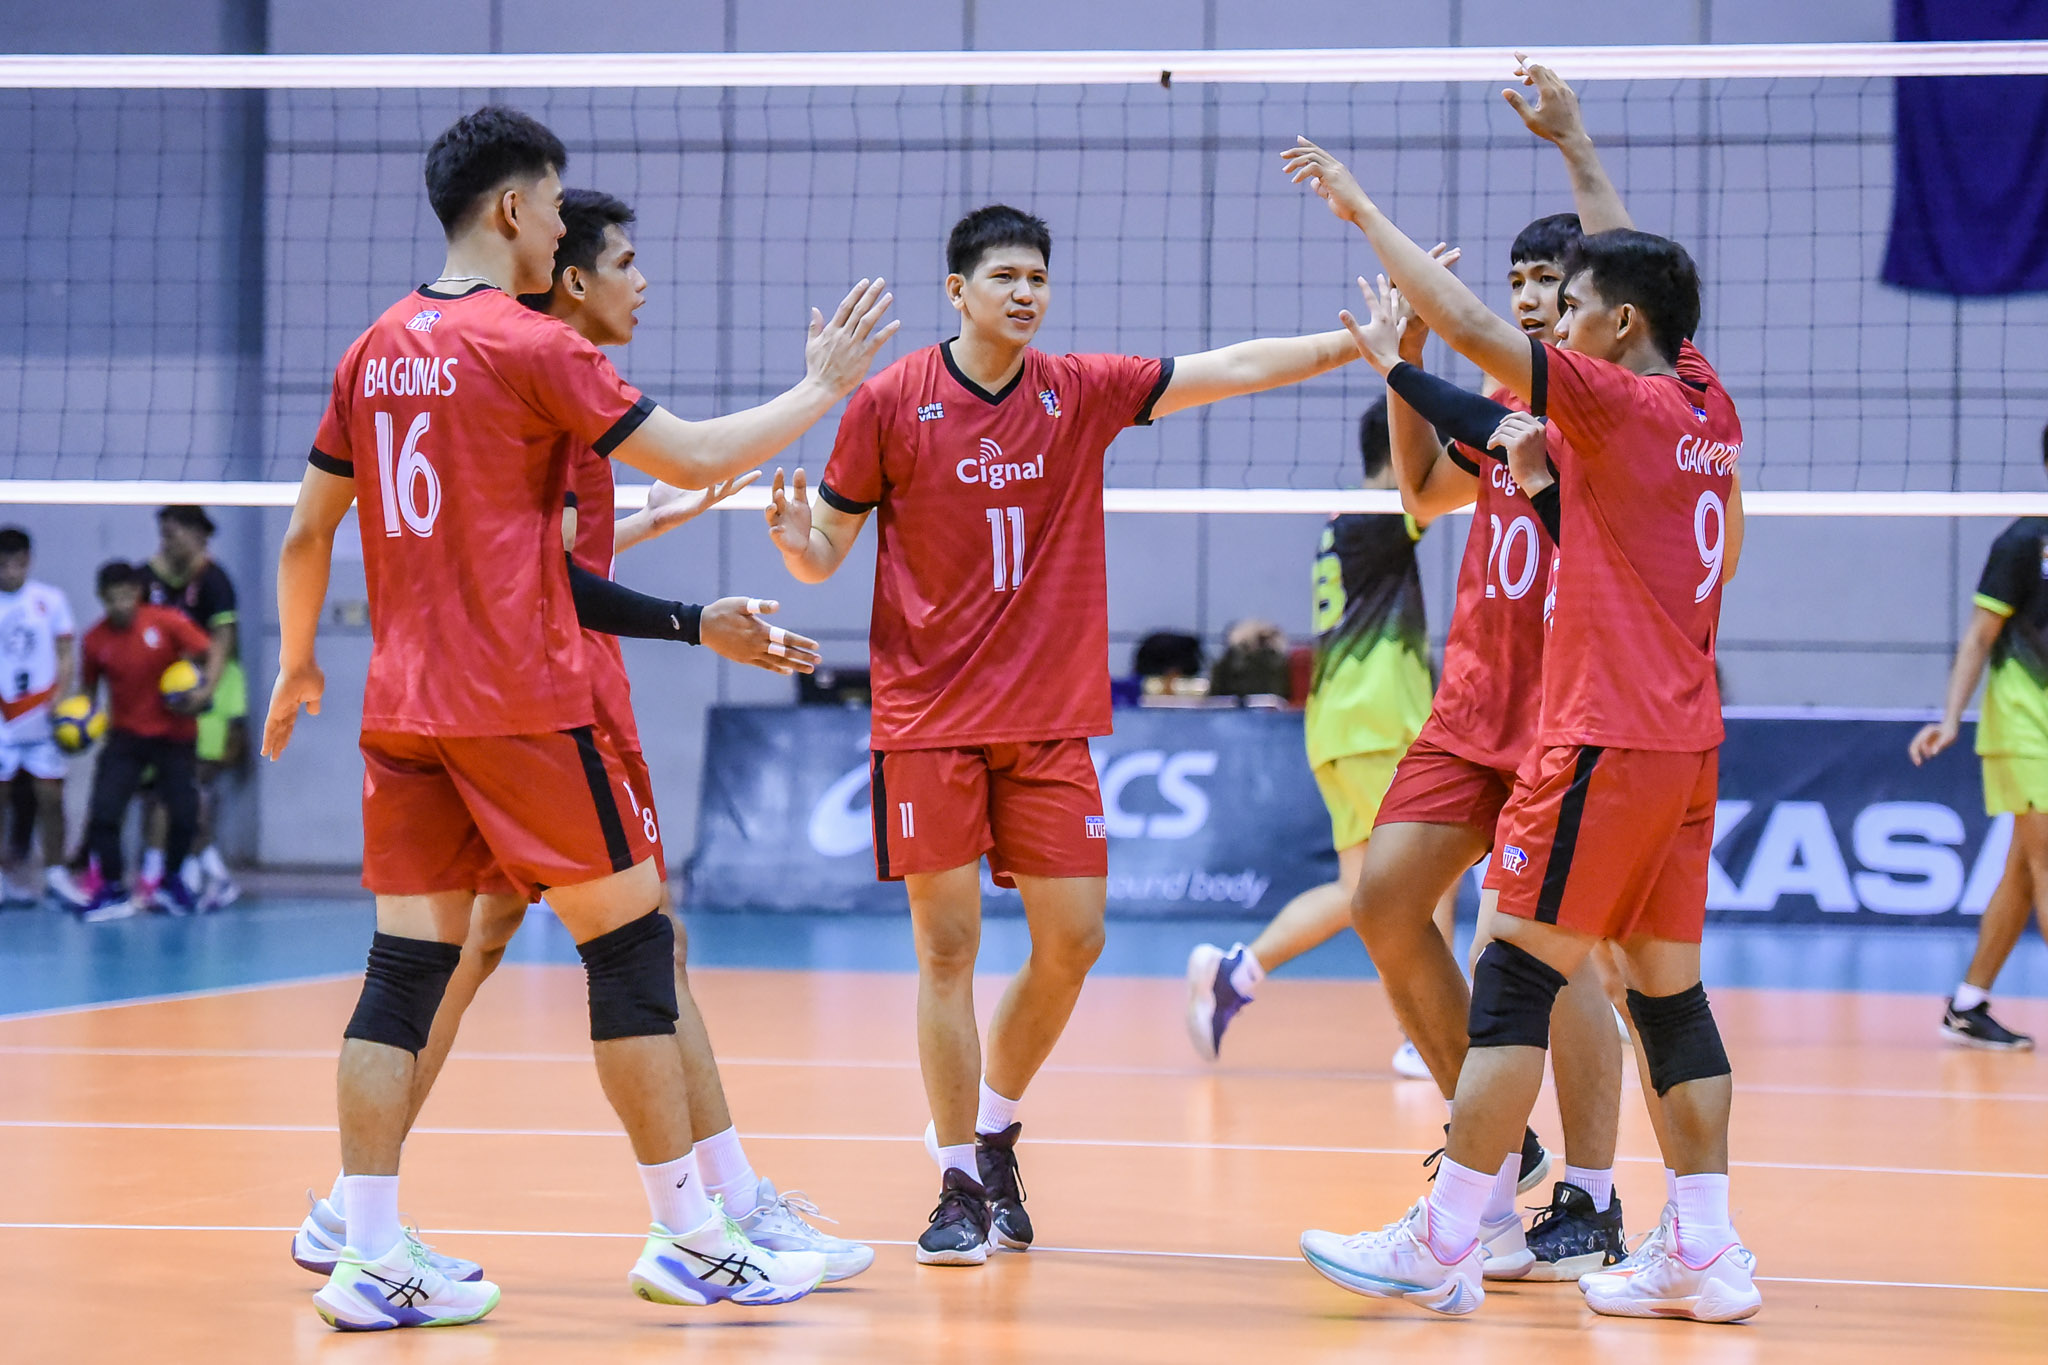 Cignal HD Spikers in the Spikers' Turf Open Conference